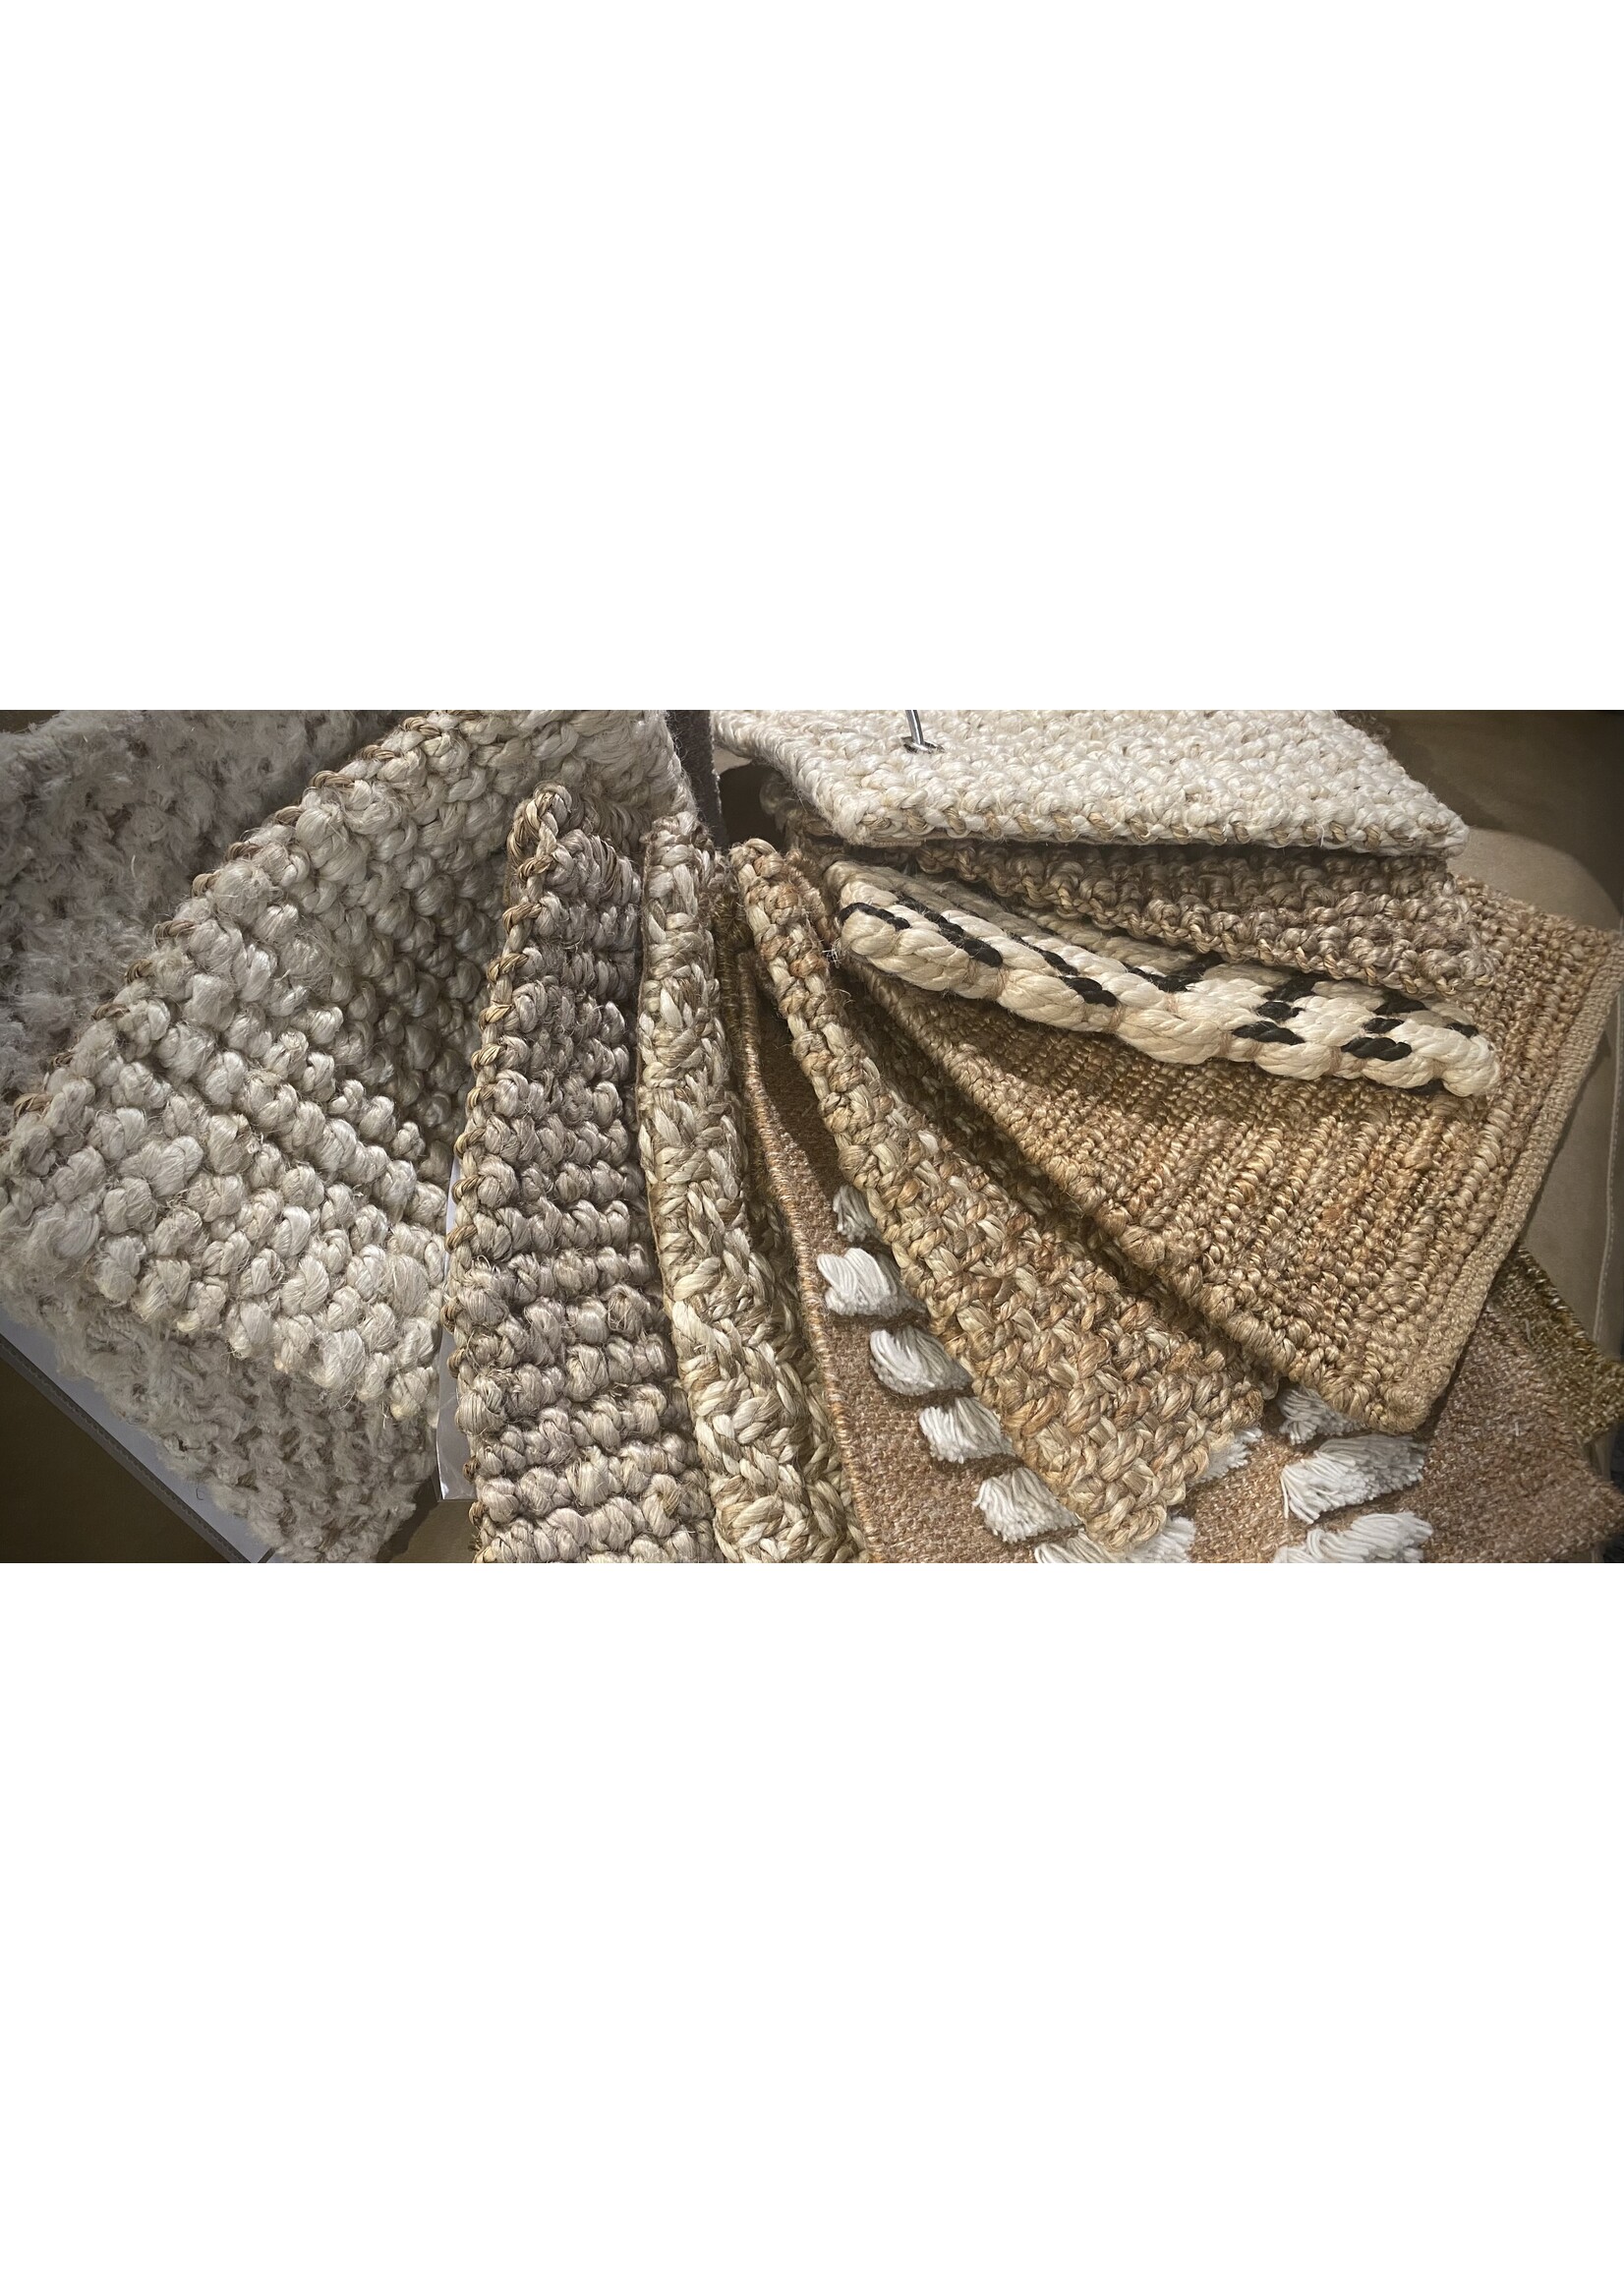 Mango Jute Rug Flash Sale 5' x 8'  sizes varies (Clearance) No additional Discounts